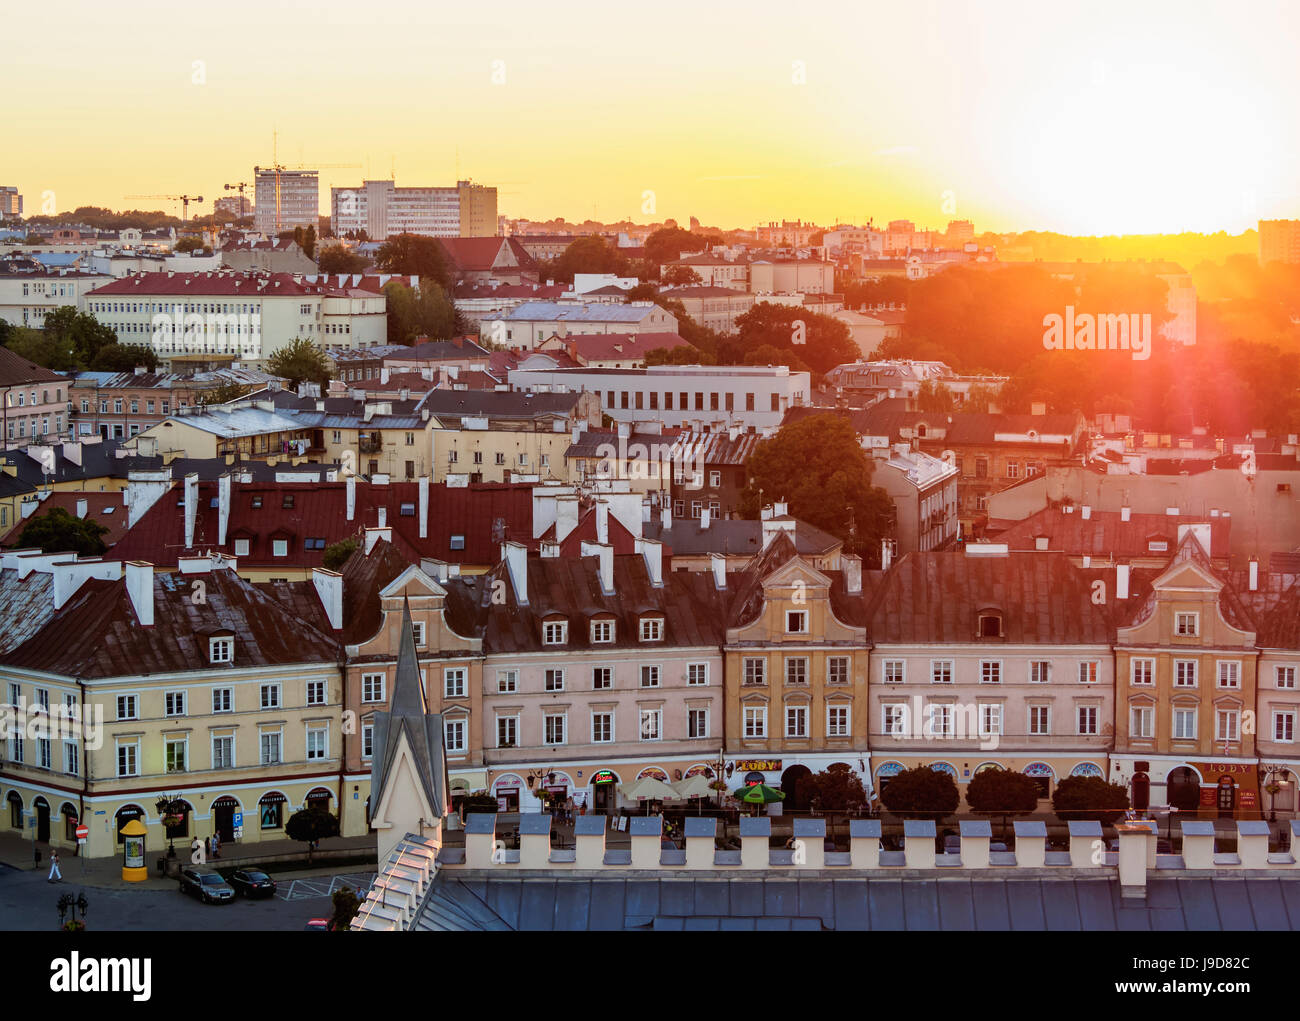 Old Town skyline at sunset, City of Lublin, Lublin Voivodeship, Poland, Europe Stock Photo